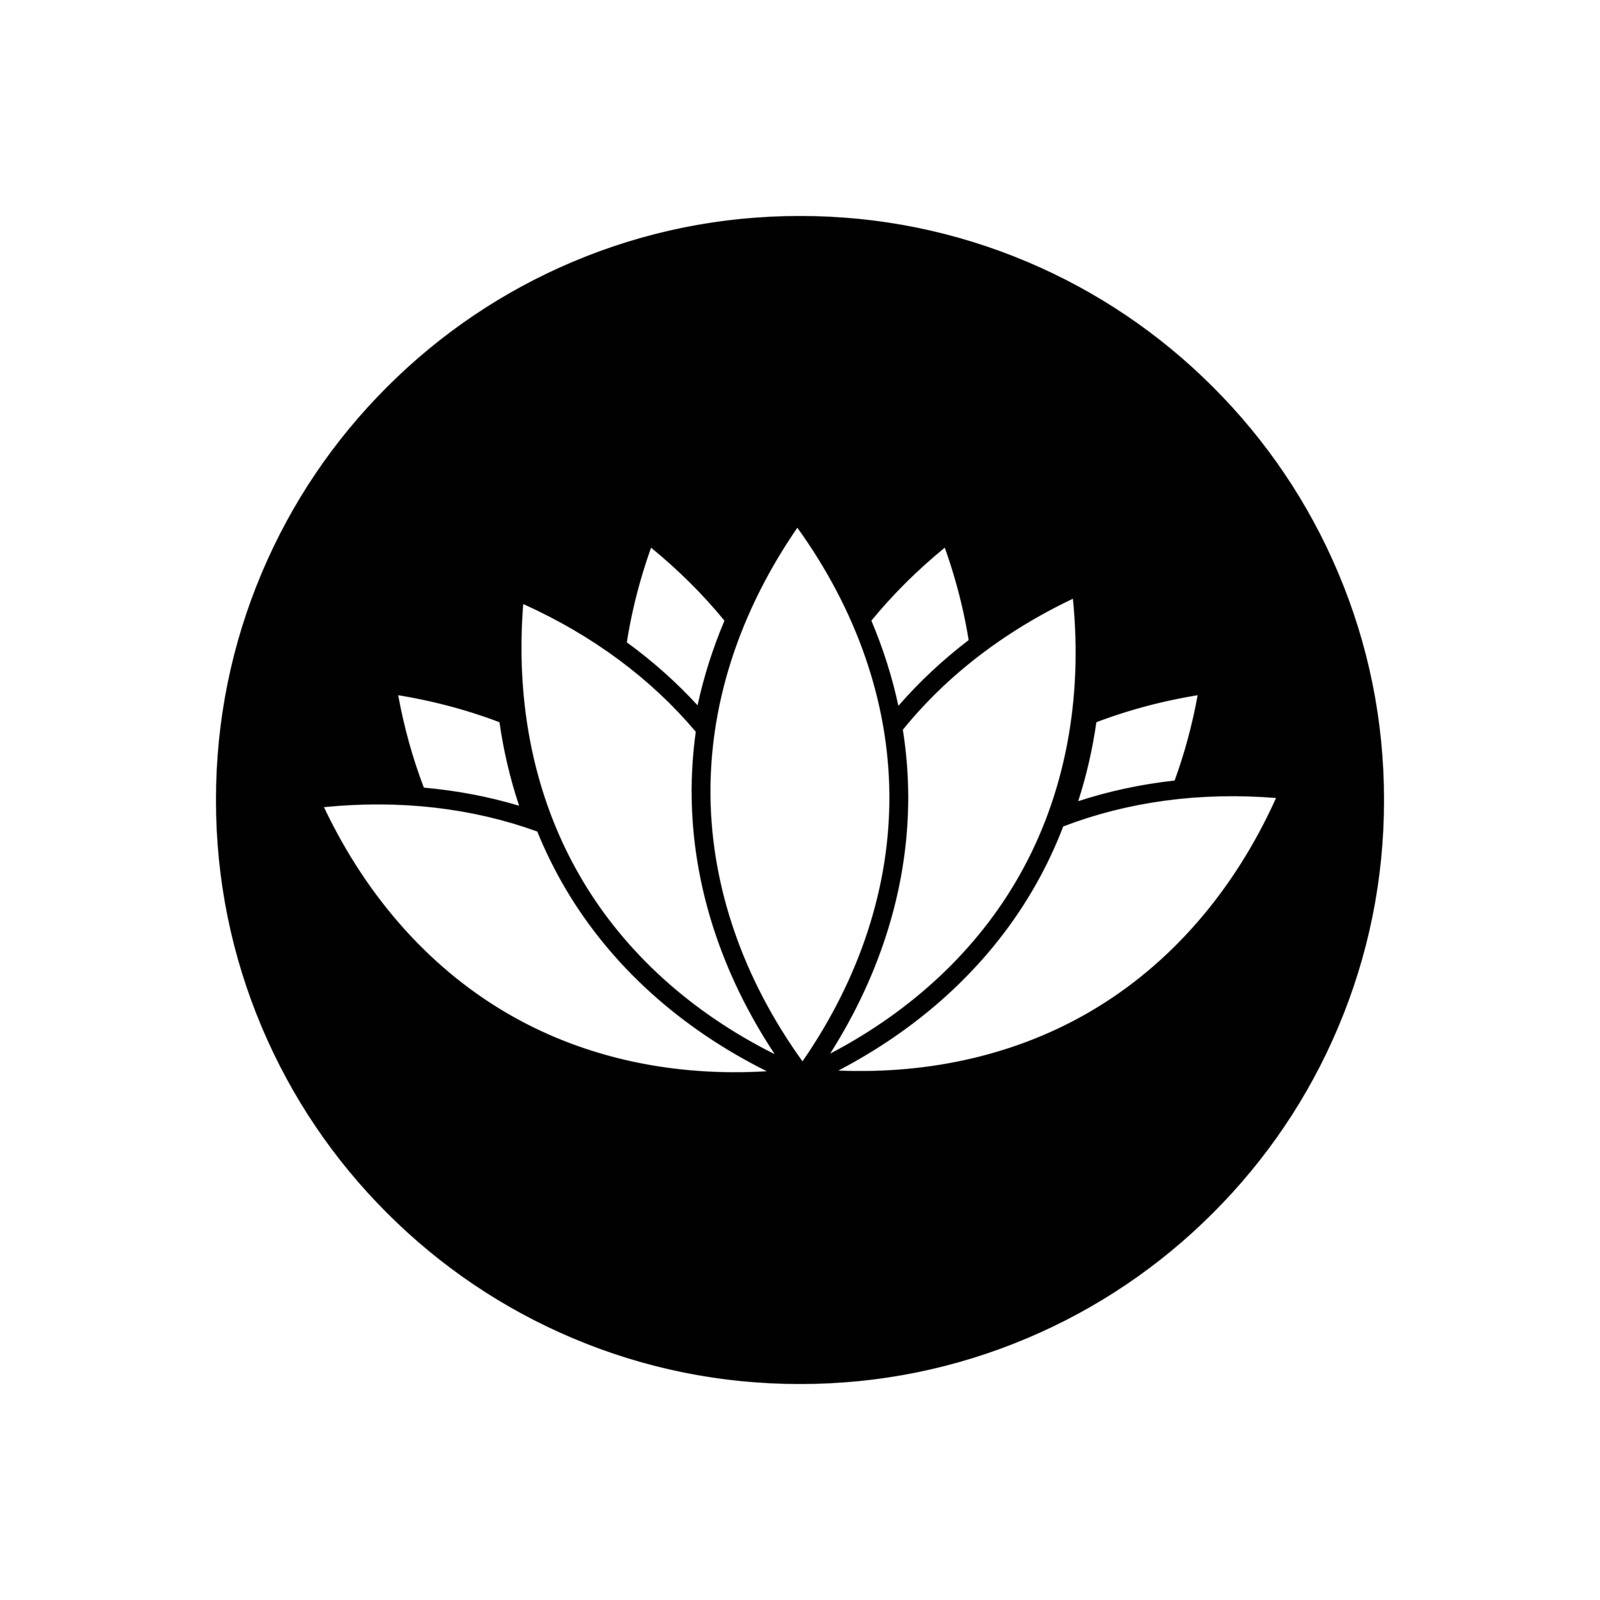 Lotus icon in black circle isolated on white background. Lily icon. Lotus abstract icon in black. Vector illustration for graphic design, Web, UI, app